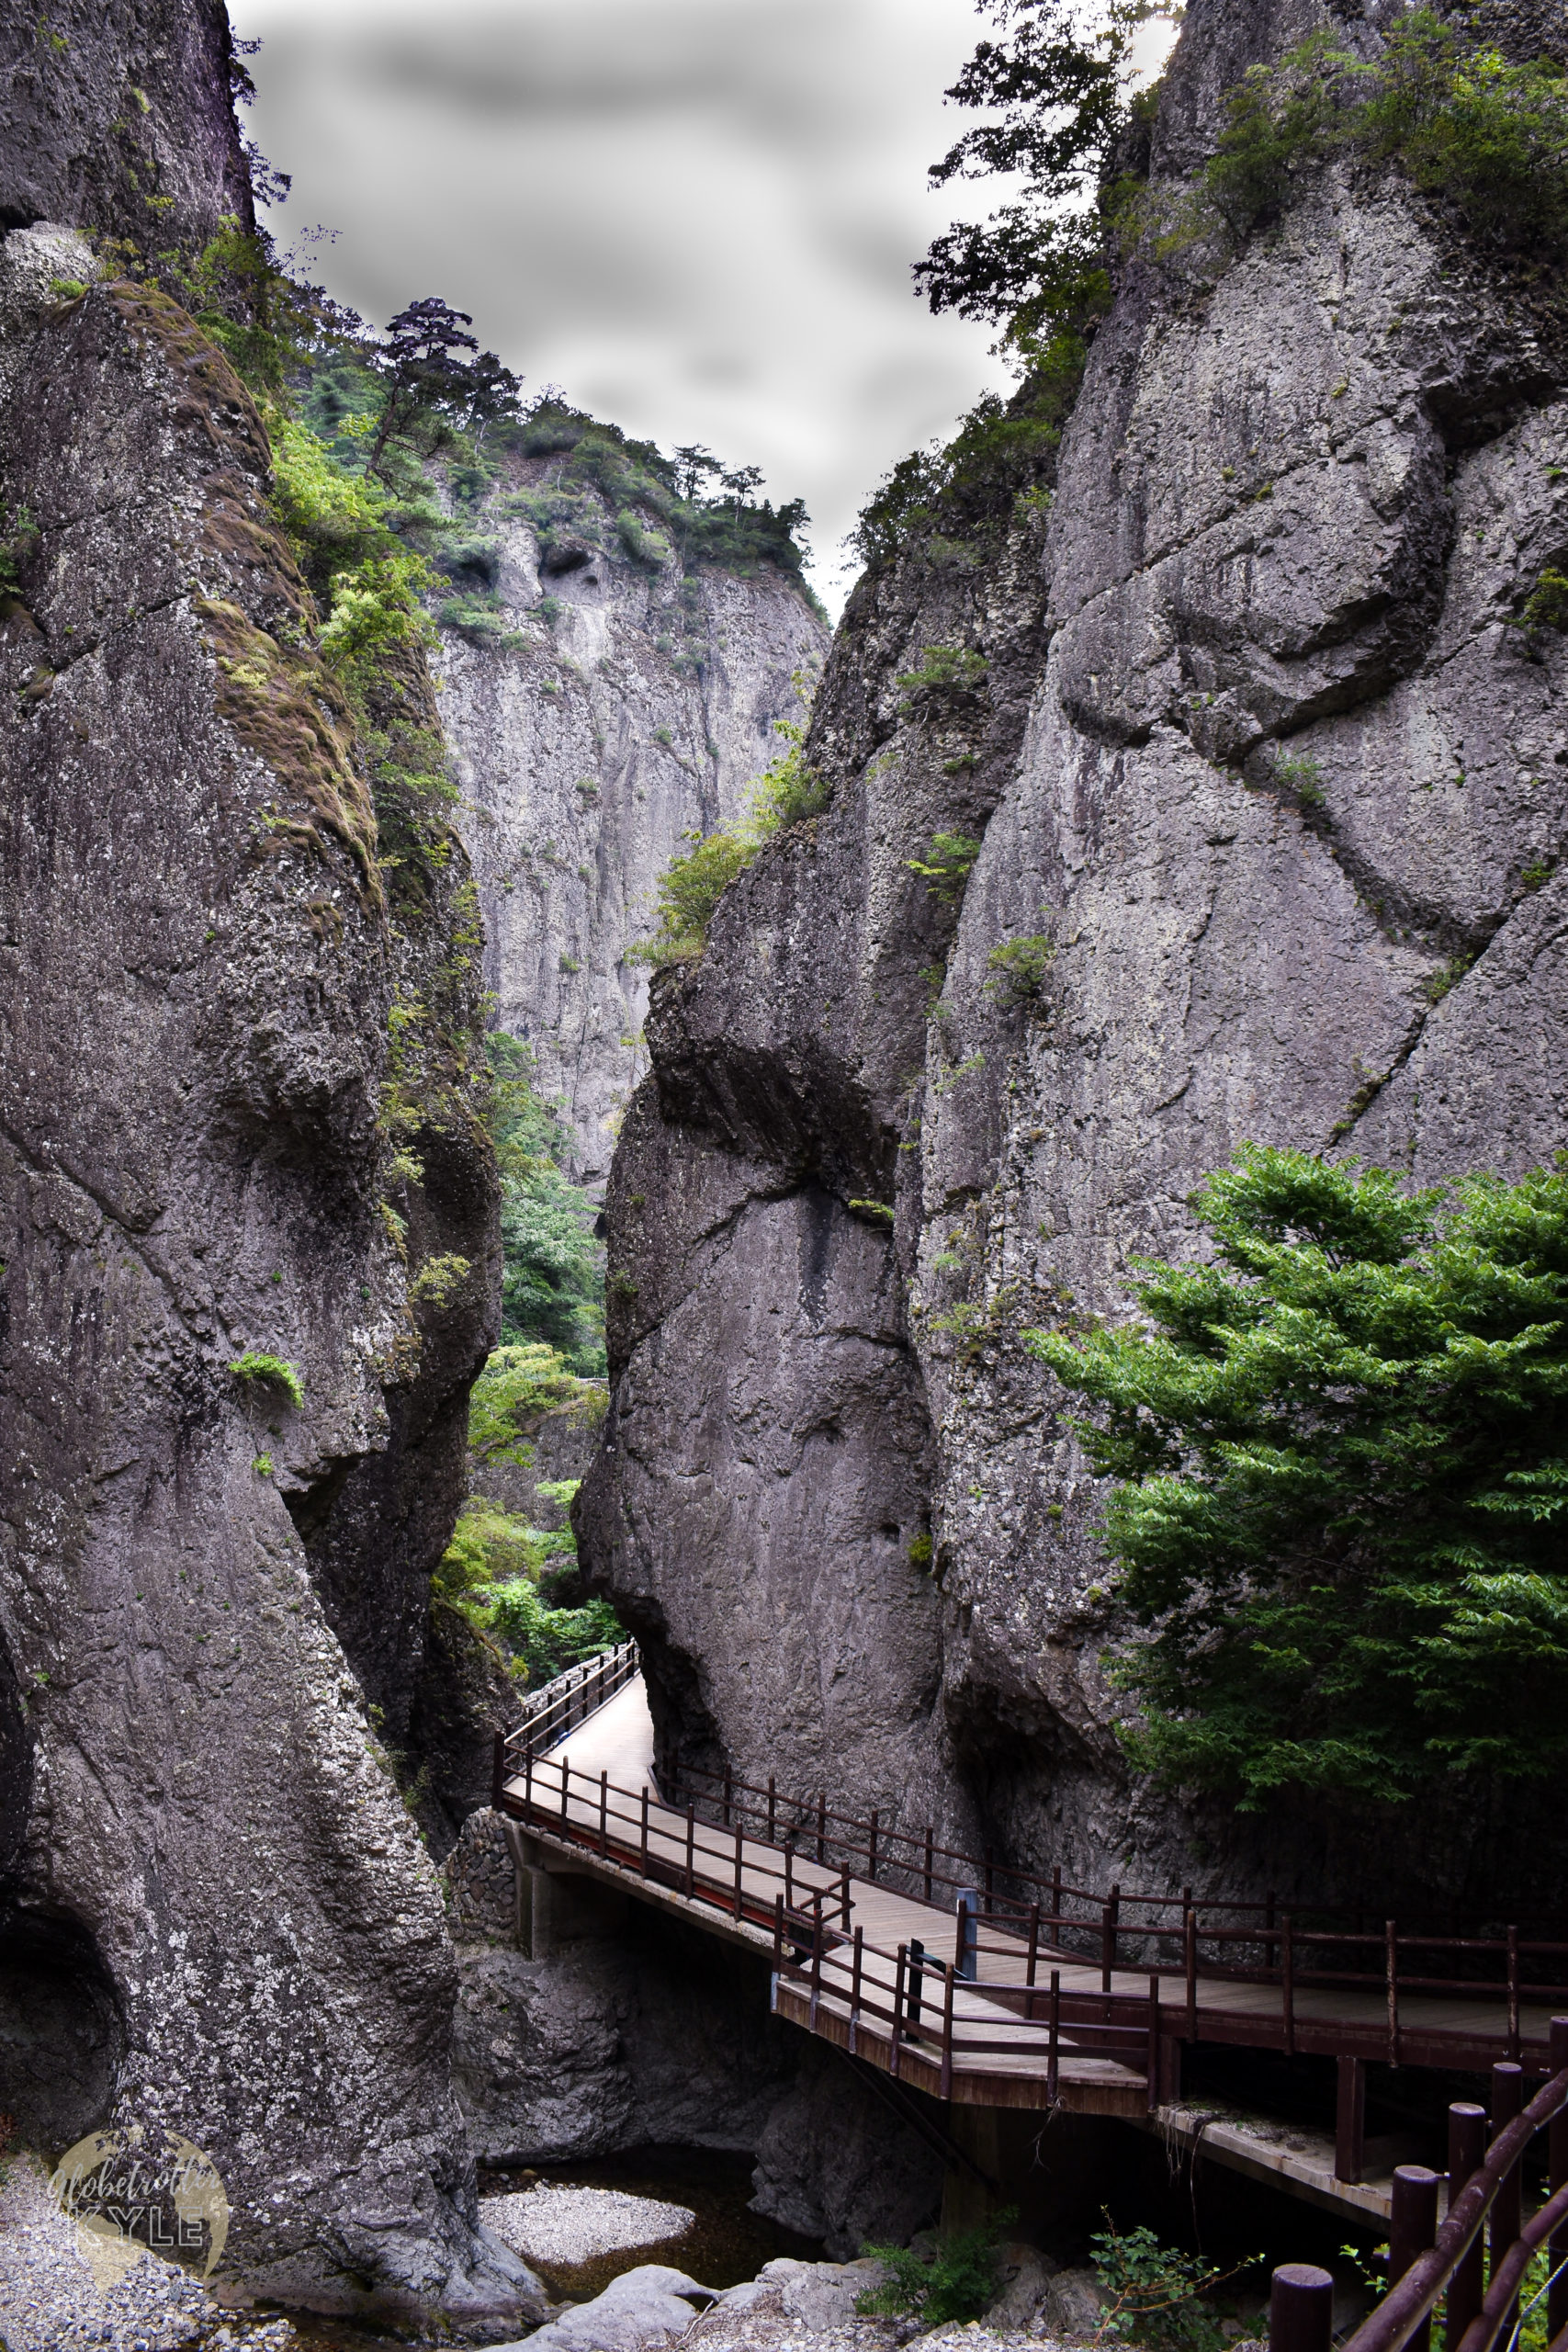 a walkway passes through a rocky canyon with trees on either side in south korea juwangsan national park